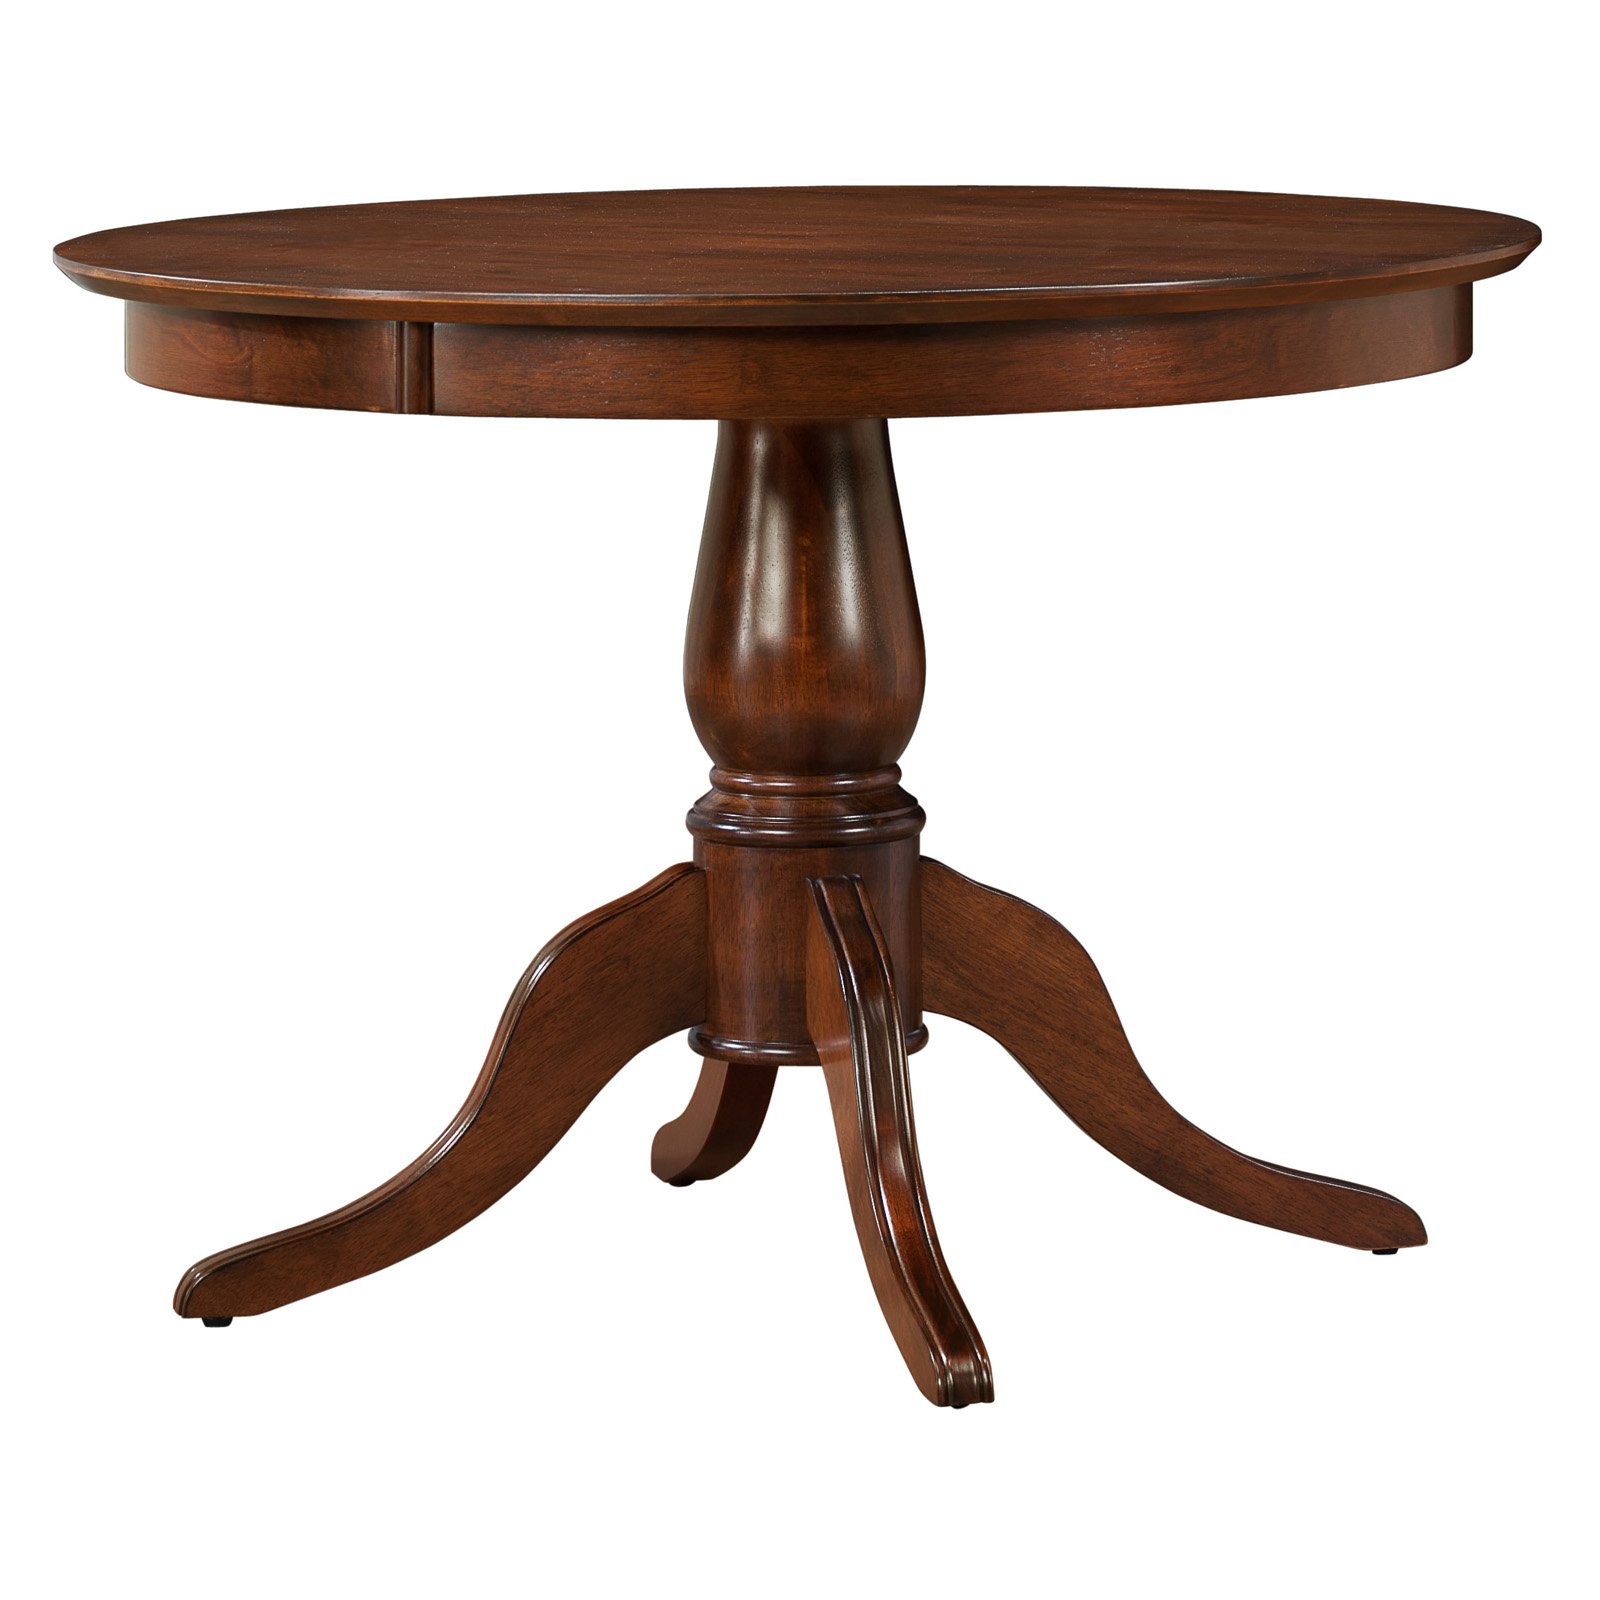 1600x1600px 8 Wonderful 42 Round Pedestal Dining Table Picture in Furniture